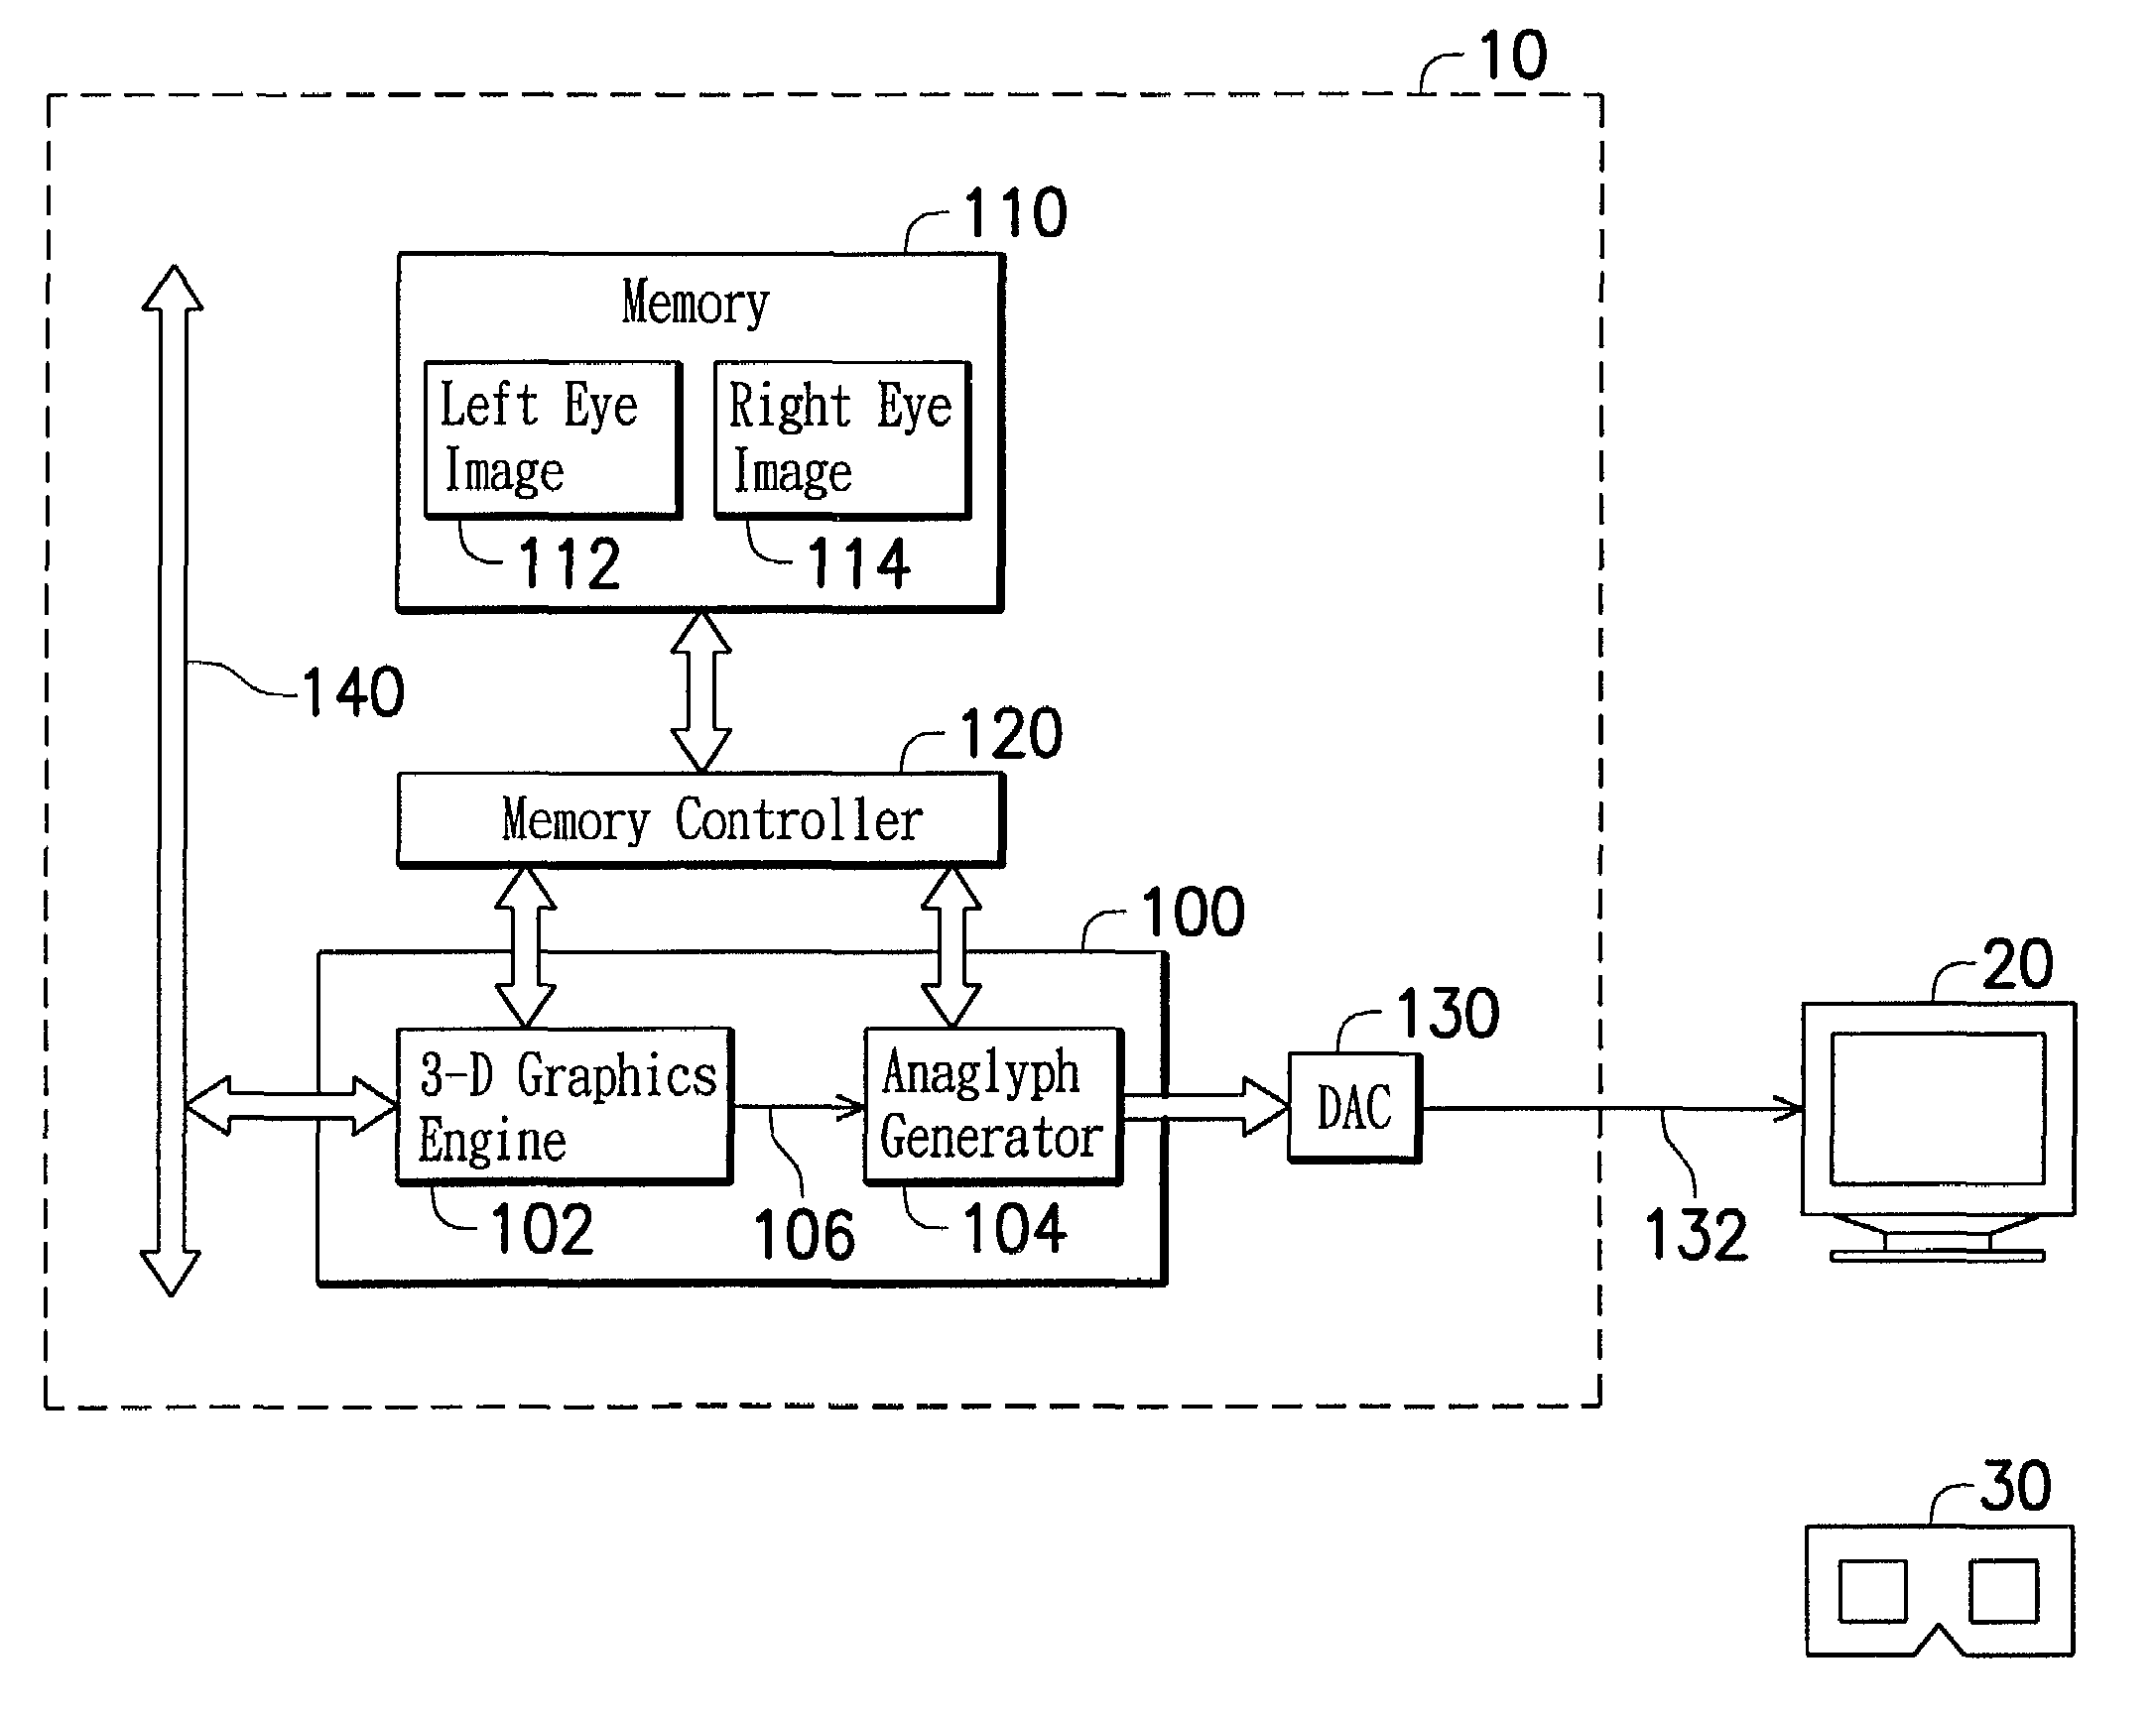 Apparatus for producing real-time anaglyphs